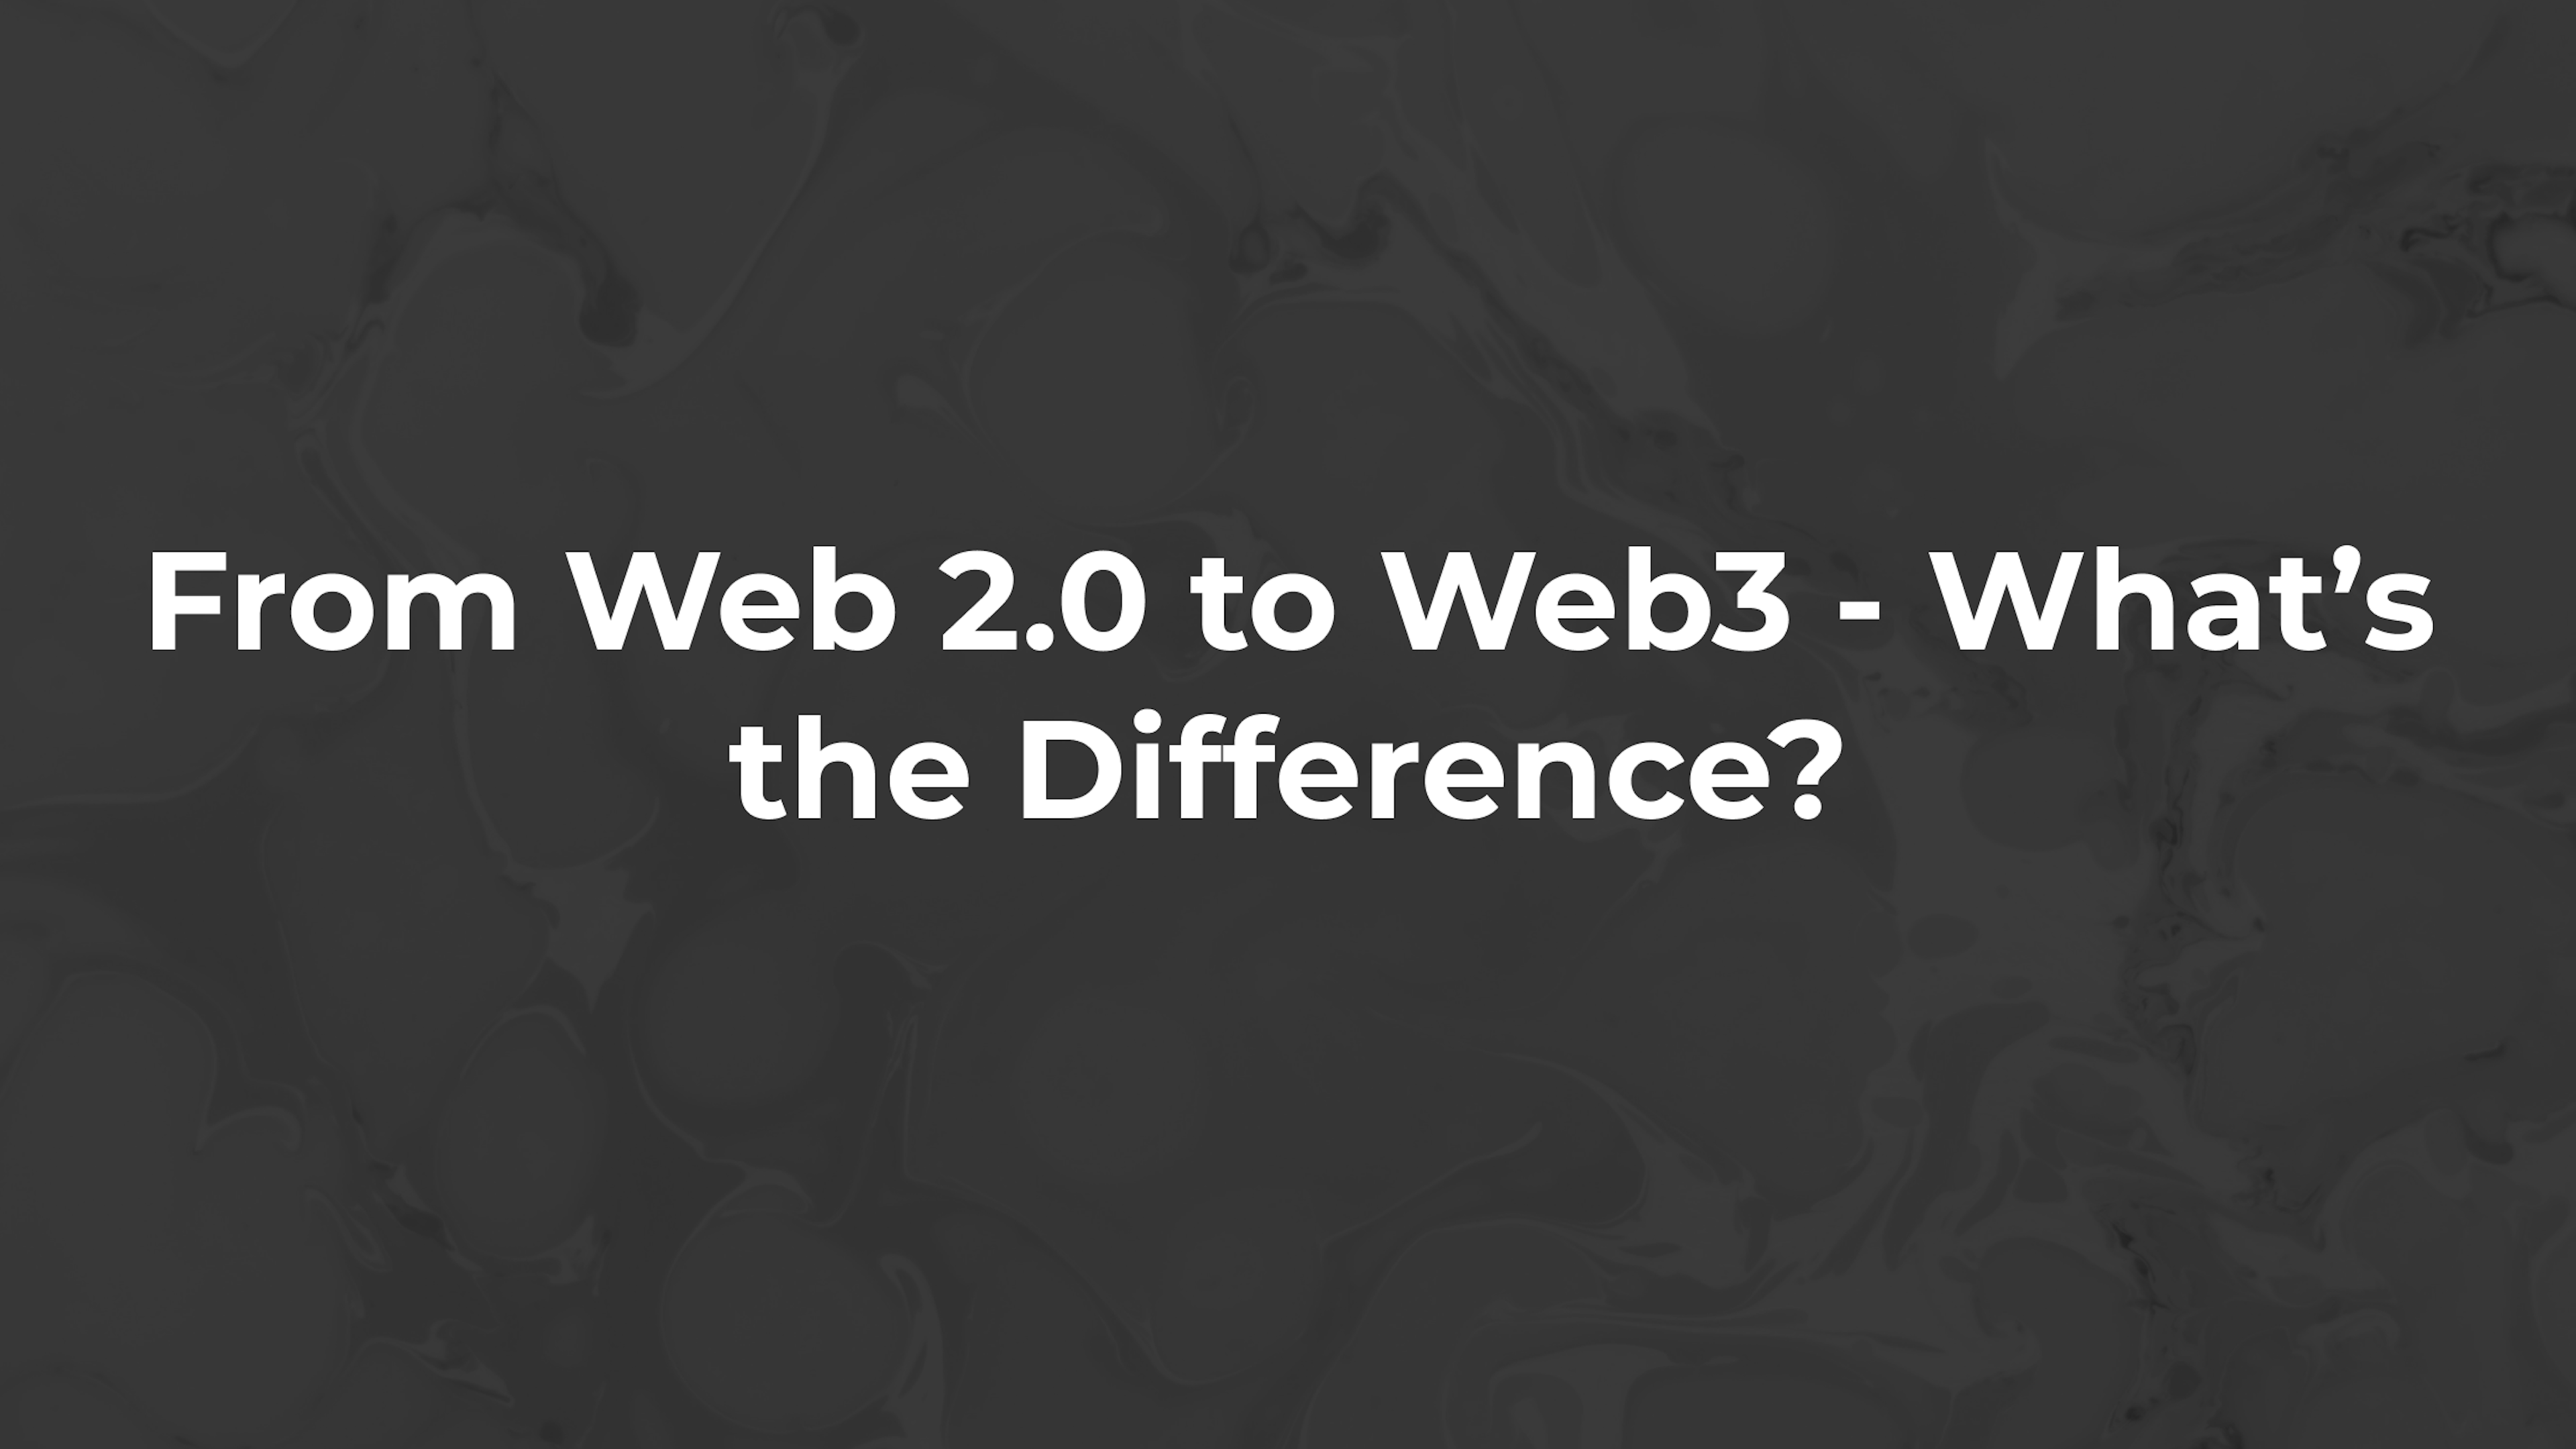 From Web 2.0 to Web3 - What’s the Difference?